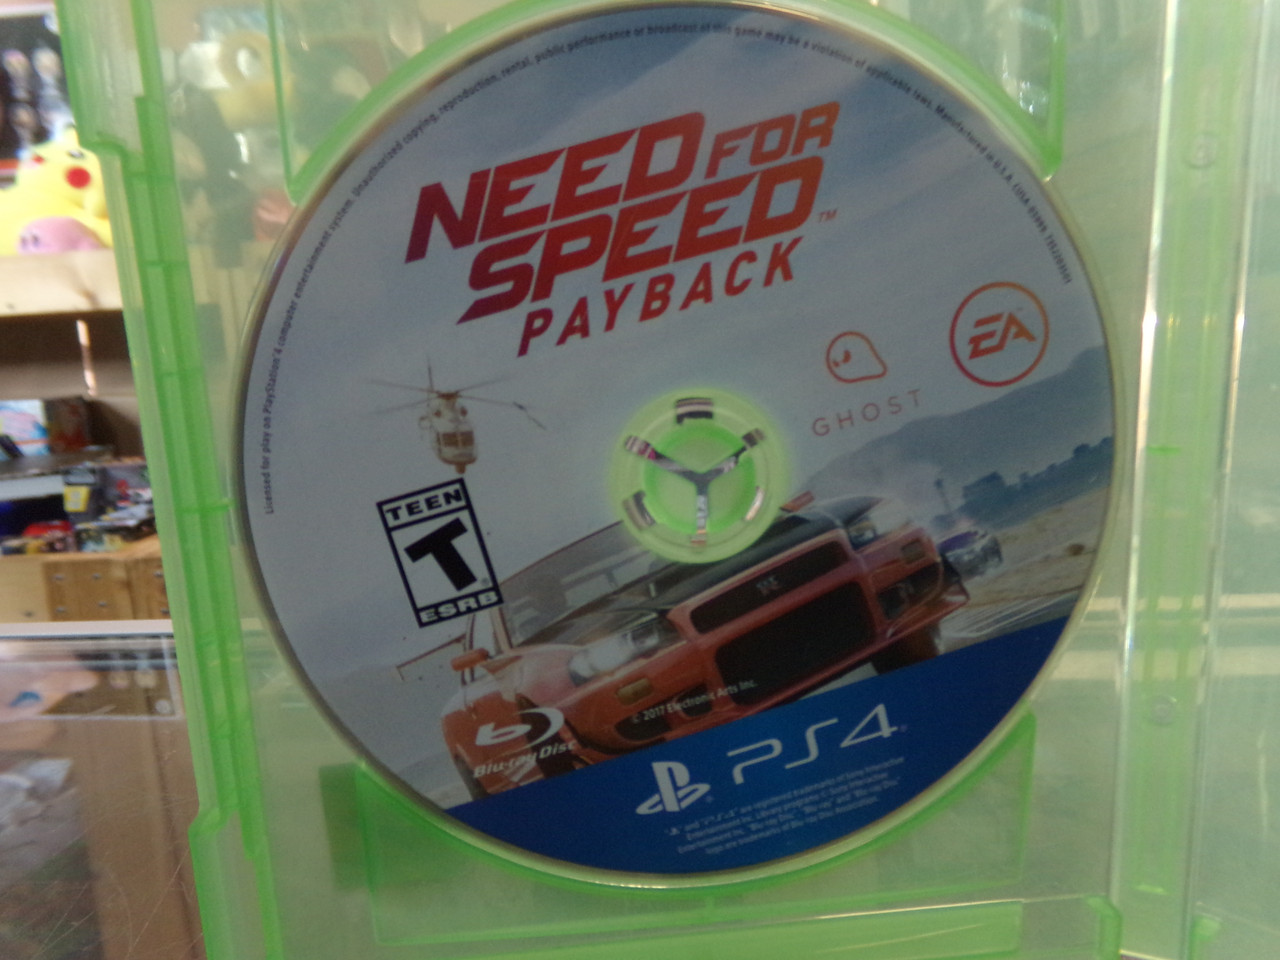 Disc Playstation Only for Speed: PS4 Need Payback 4